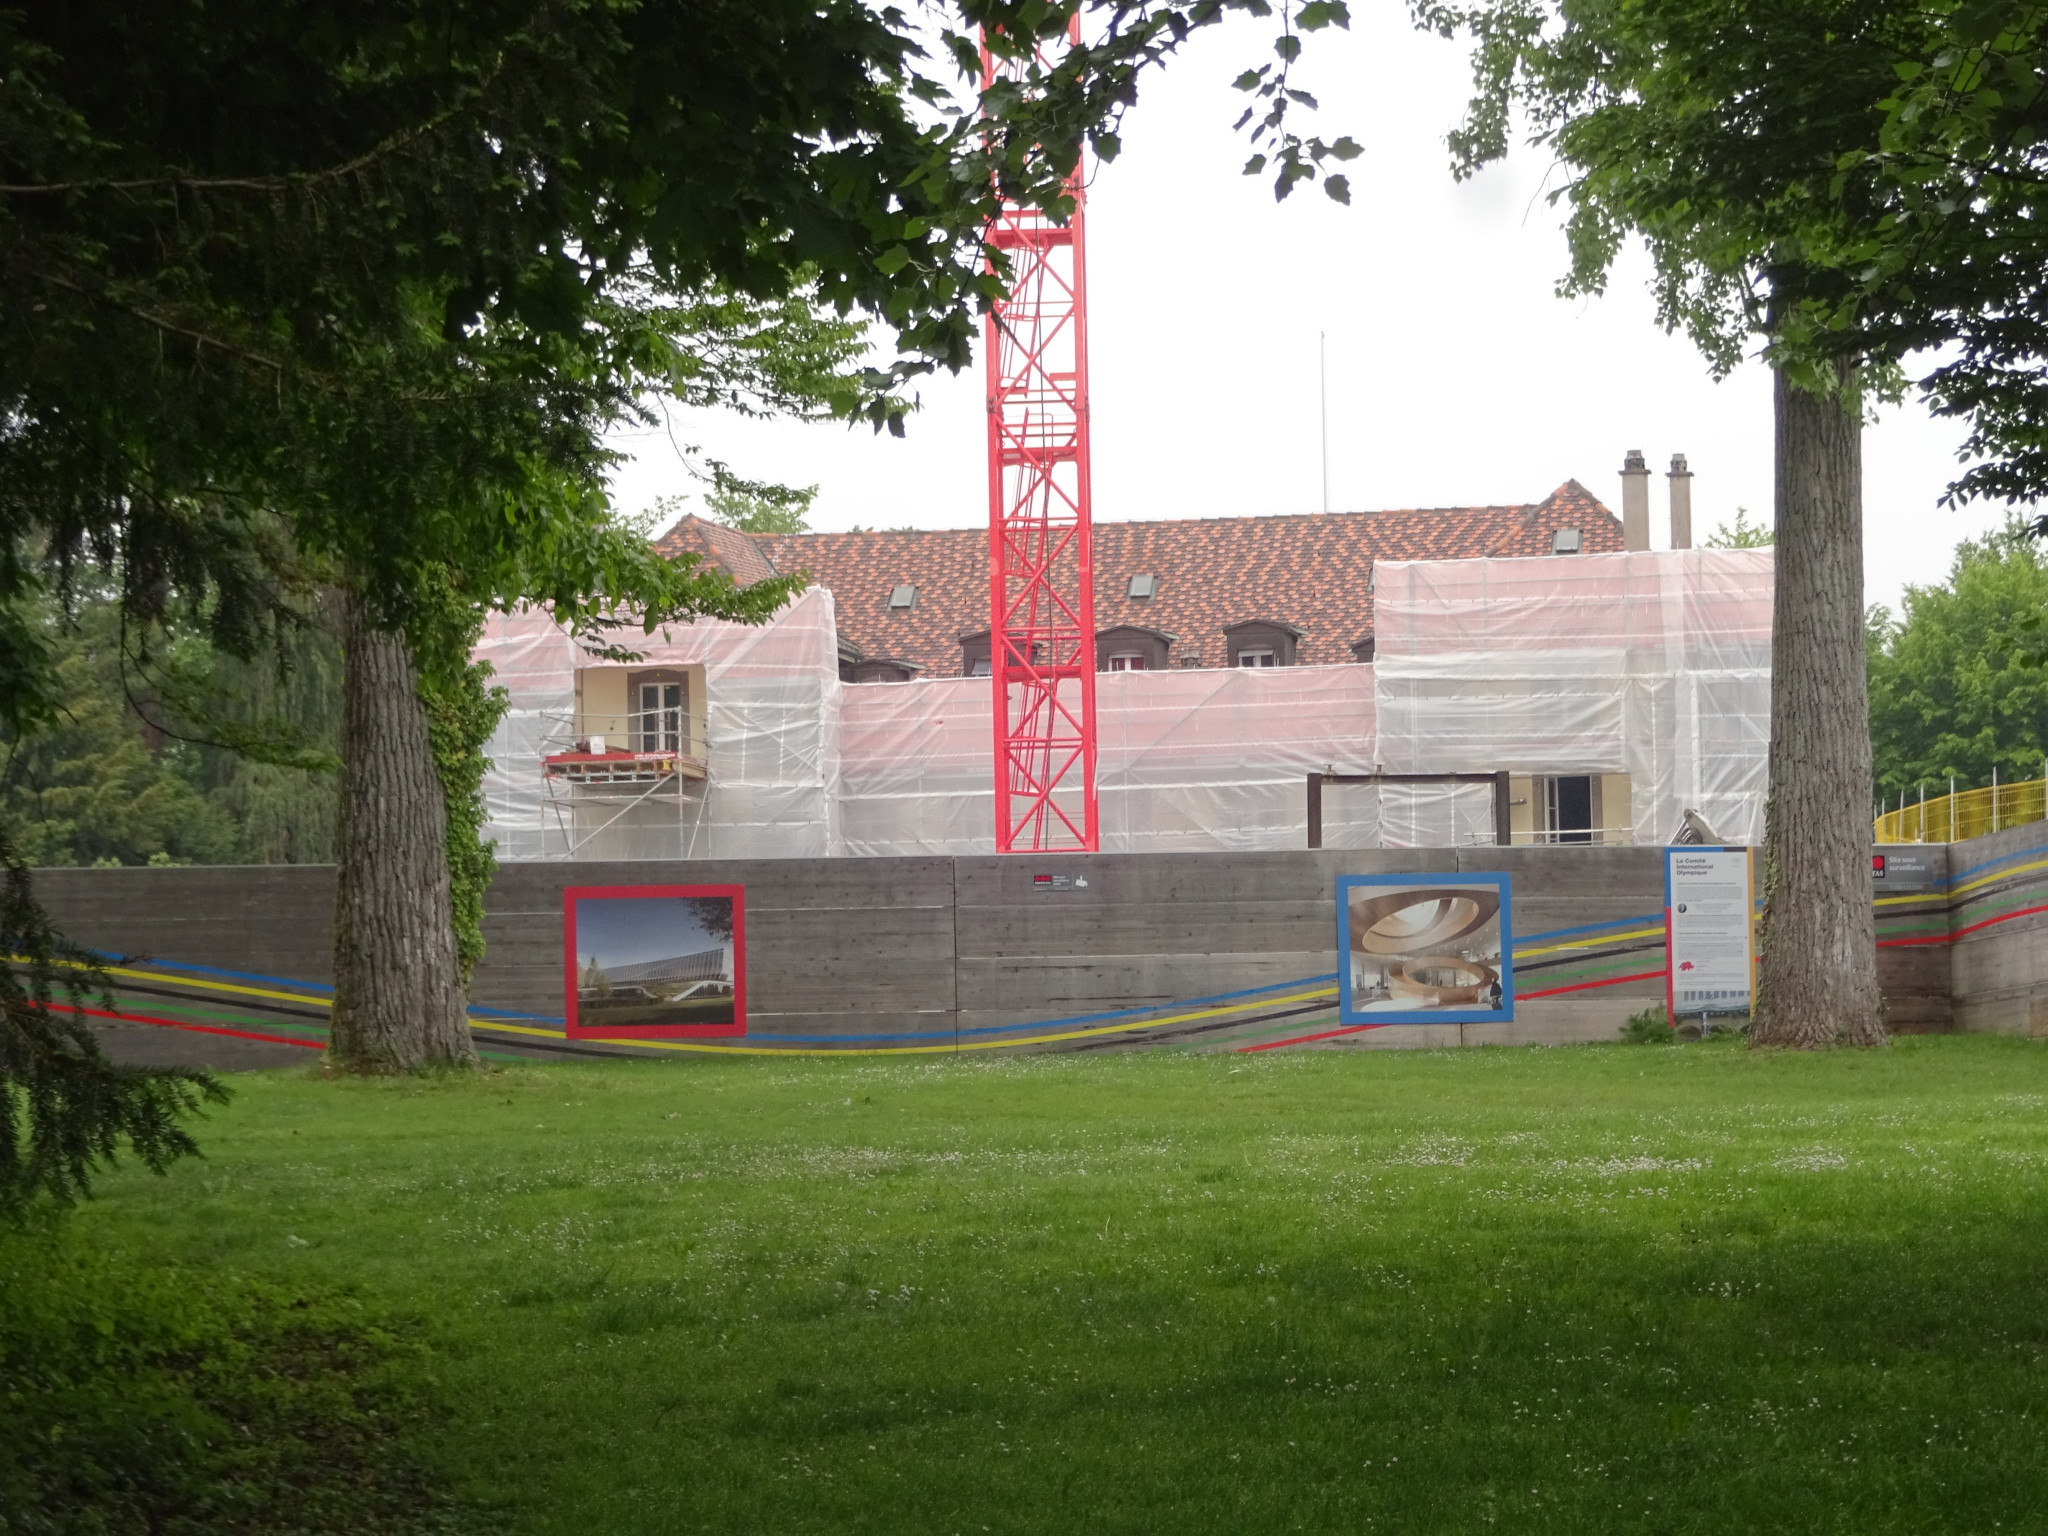 Chateau de Vidy swathed in protective sheeting during construction of the new IOC home ©ITG